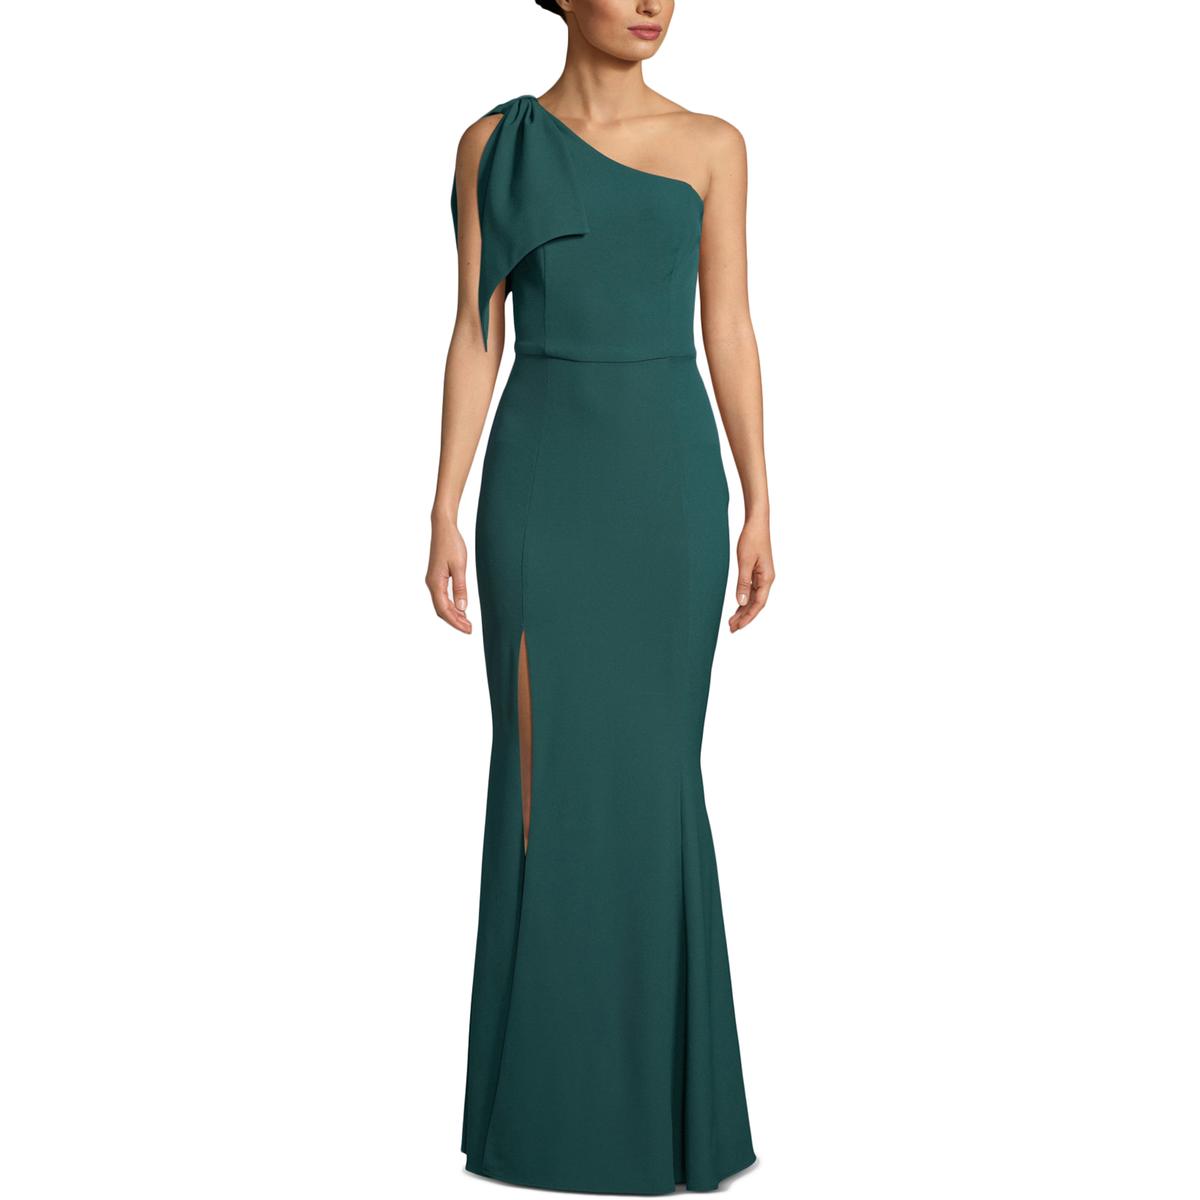 Betsy & Adam Womens Green One Shoulder Bow Crepe Formal Dress Gown 12 ...